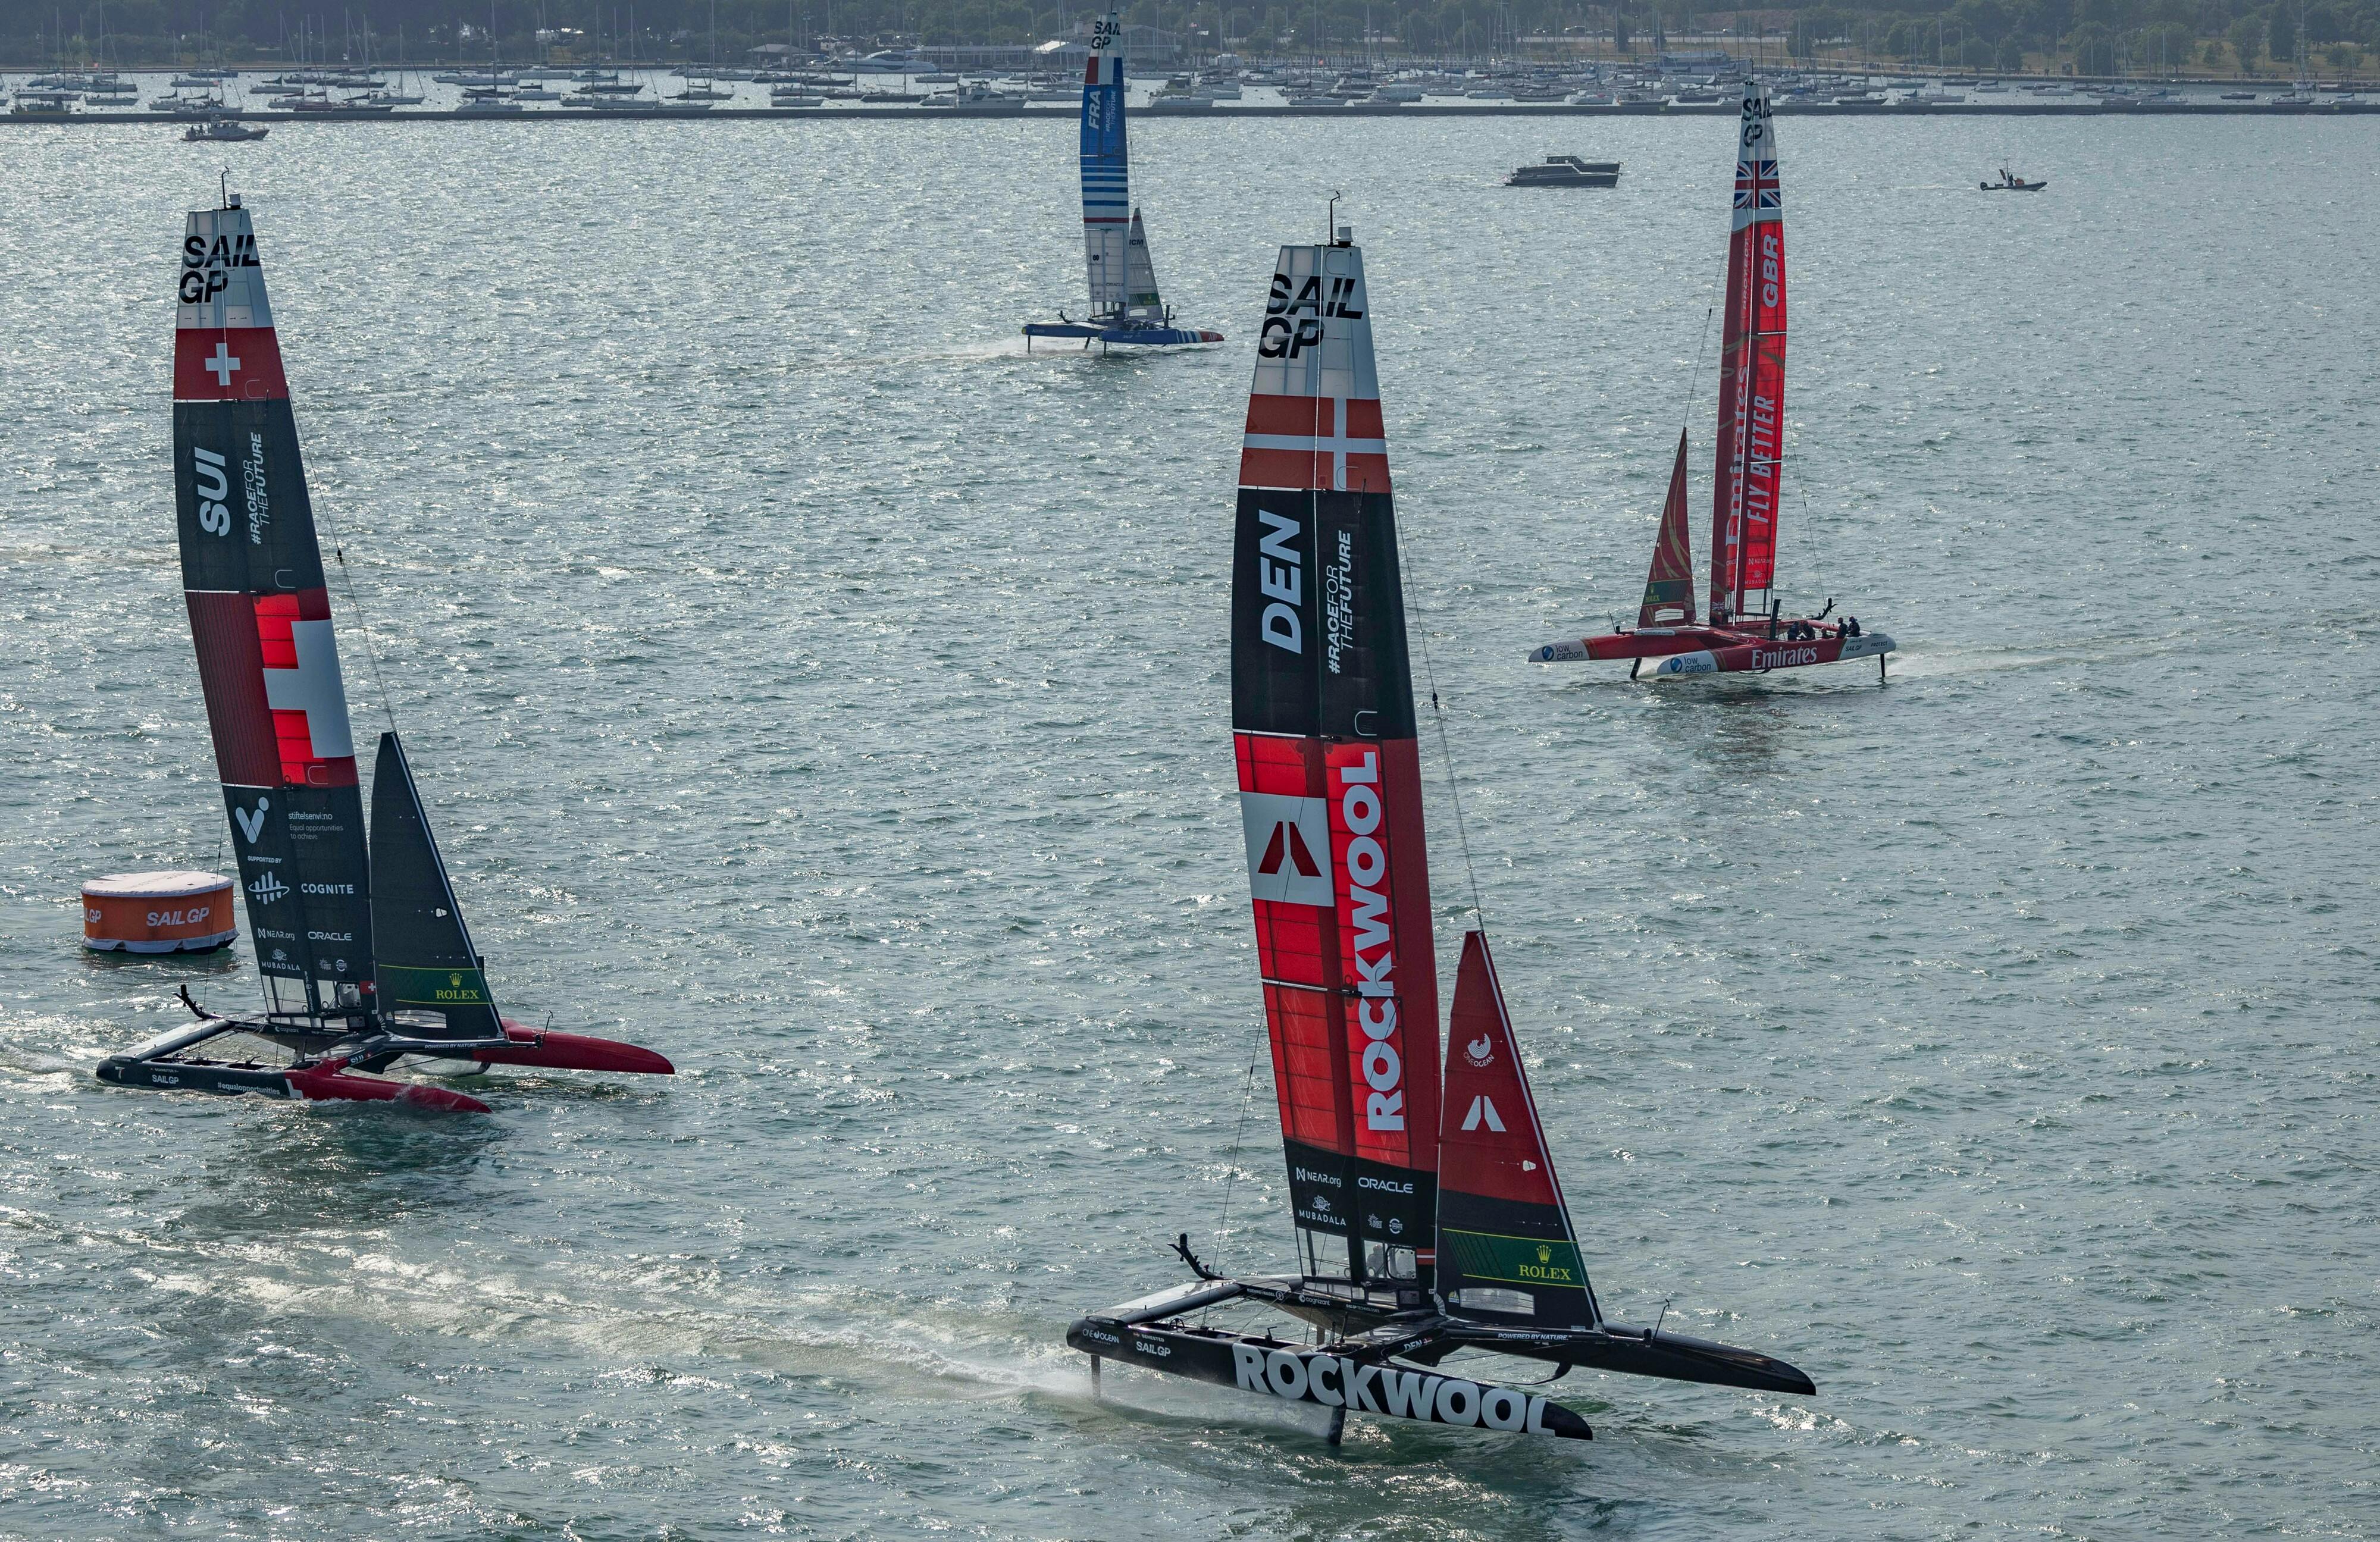 This is what it takes to win SailGP